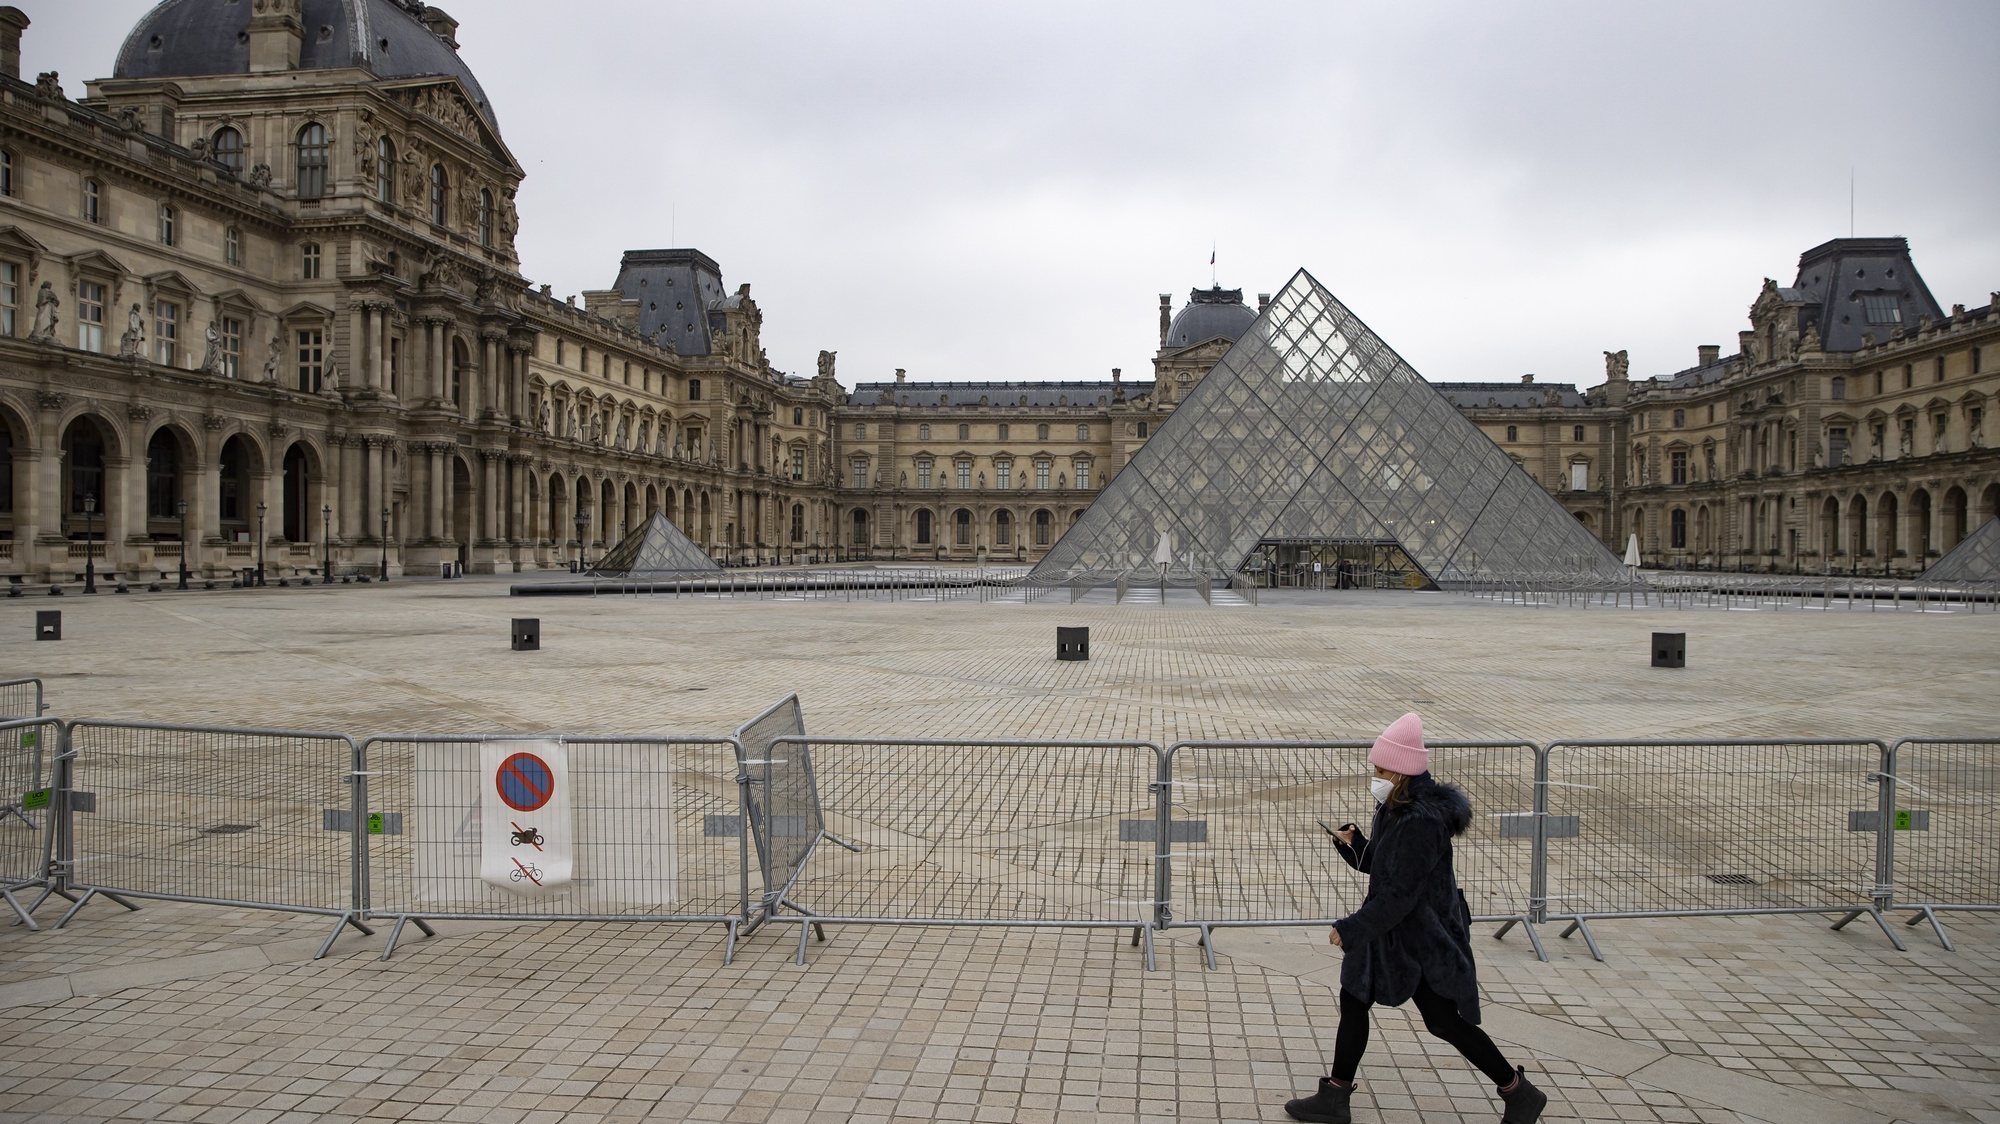 epa08924851 Metal barriers block the access to the pyramids of the Louvre museum in Paris, France, 07 January 2021. Cultural sites including museums, cinemas and theatres were originally due to reopen on 07 January 2021 after shutting on 28 October 2020 as part of the second lockdown, but the government decided to put the reopening plans on hold due to the surge in covid-19 cases.  EPA/IAN LANGSDON